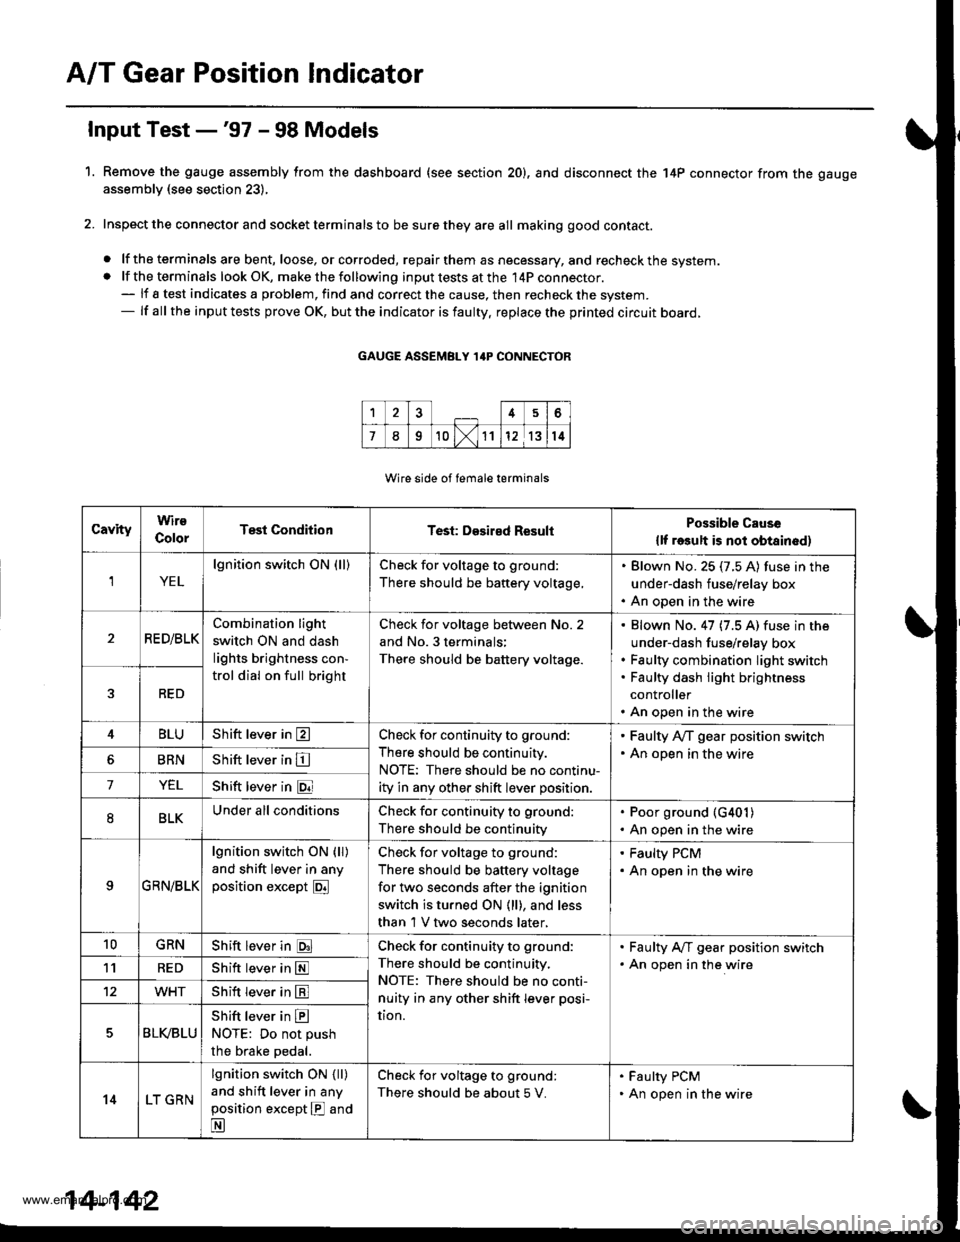 HONDA CR-V 1997 RD1-RD3 / 1.G Service Manual 
A/T Gear Position Indicator
1.
f nput Test -97 - 98 Models
Remove the gauge assembly from the dashboard (see section 20). and disconnect the 14P connector from the gauge
assemblv (see section 23),
I